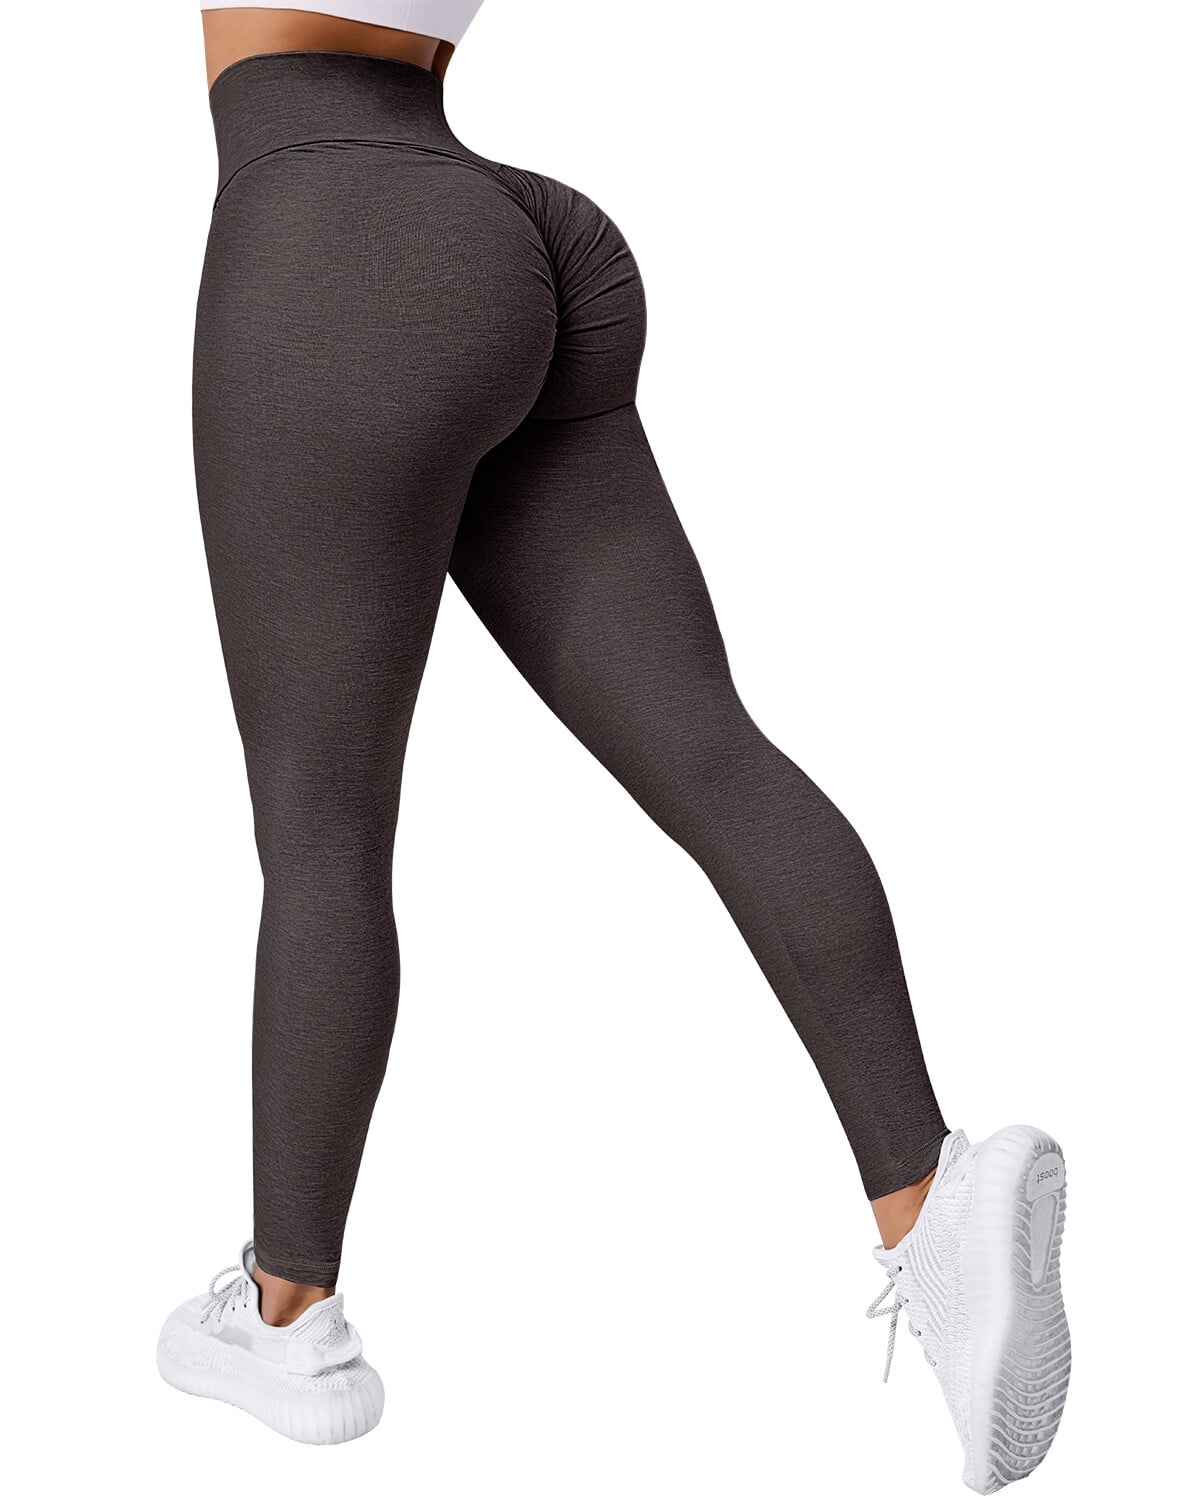 High Waist Yoga Amplify Leggings With Pockets For Women Perfect For Spring  And Summer Sports, Gym, Running, And Jogging Raising Hips And Sweatpants  For Workout From Clothes0708, $15.68